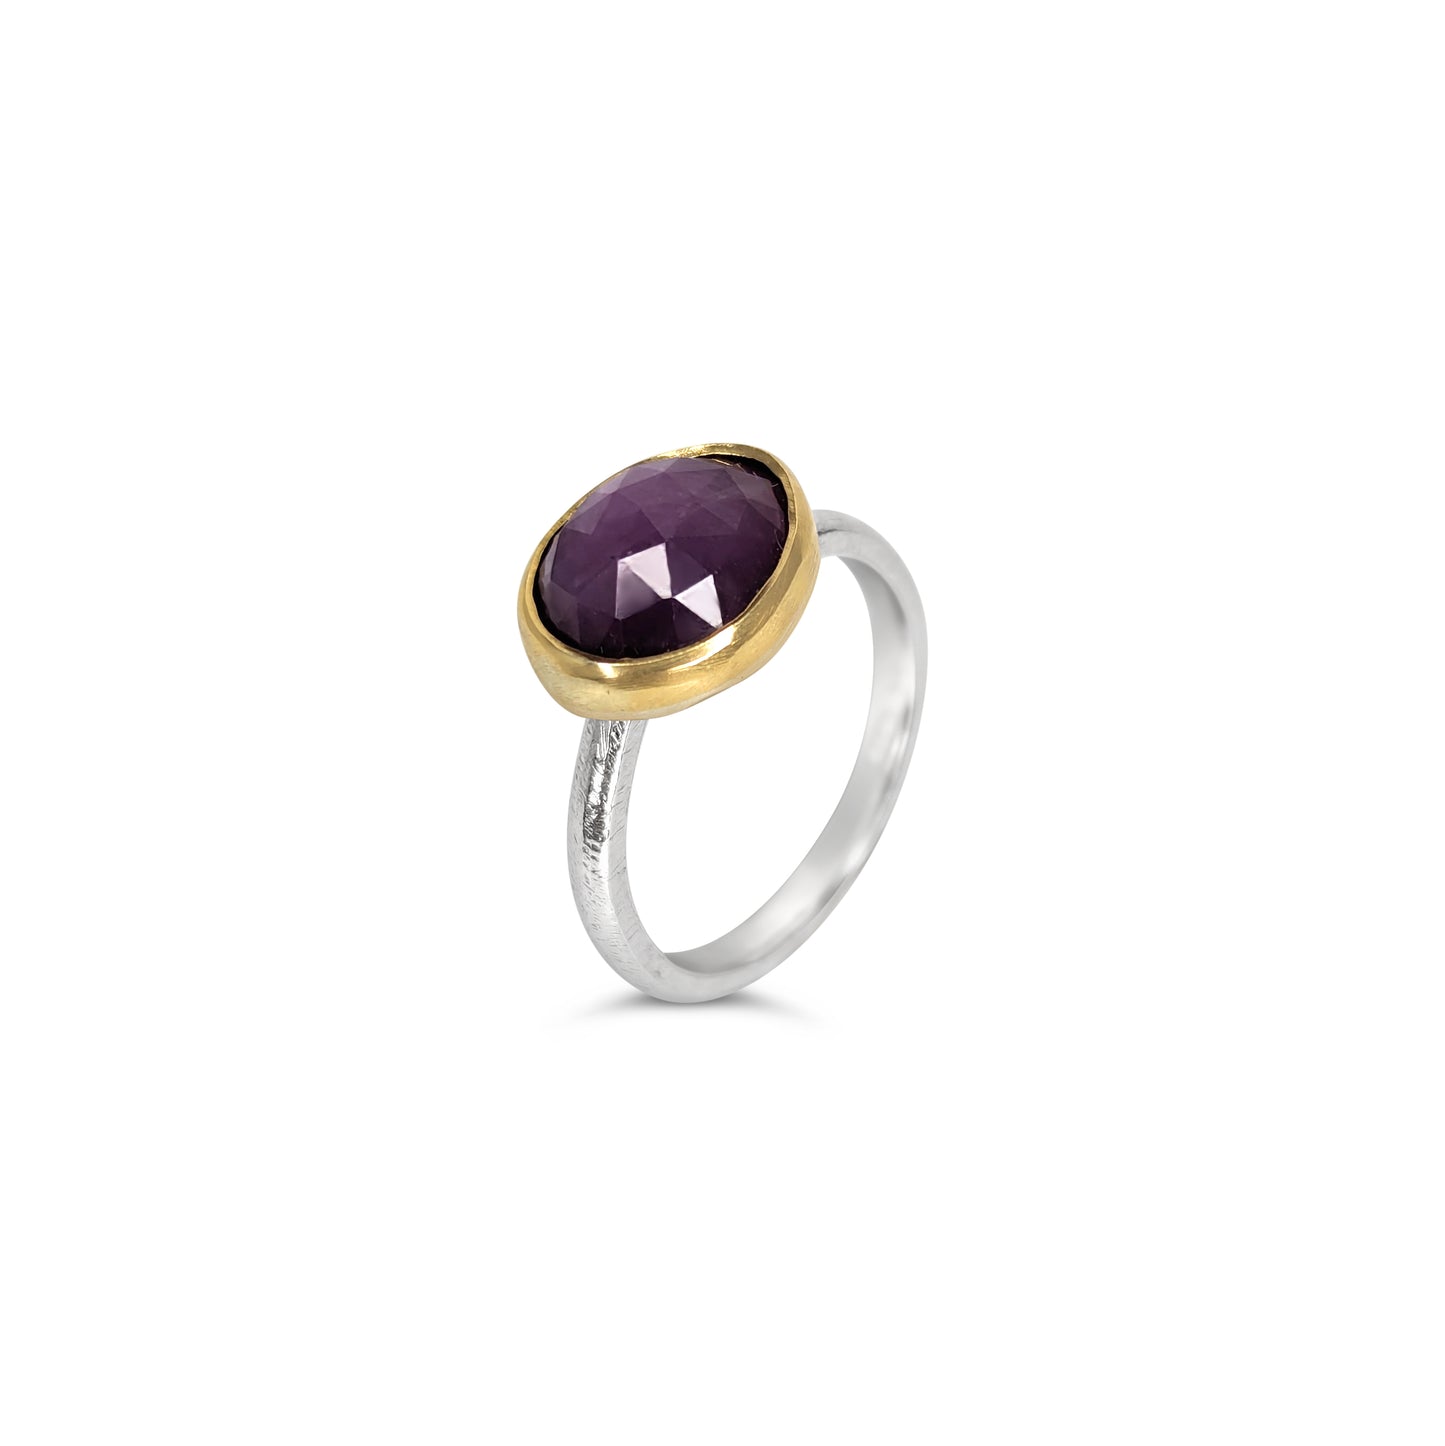 ANNE MORGAN - Rose Cut Ruby Star Sapphire in 18ct Gold and Silver Setting